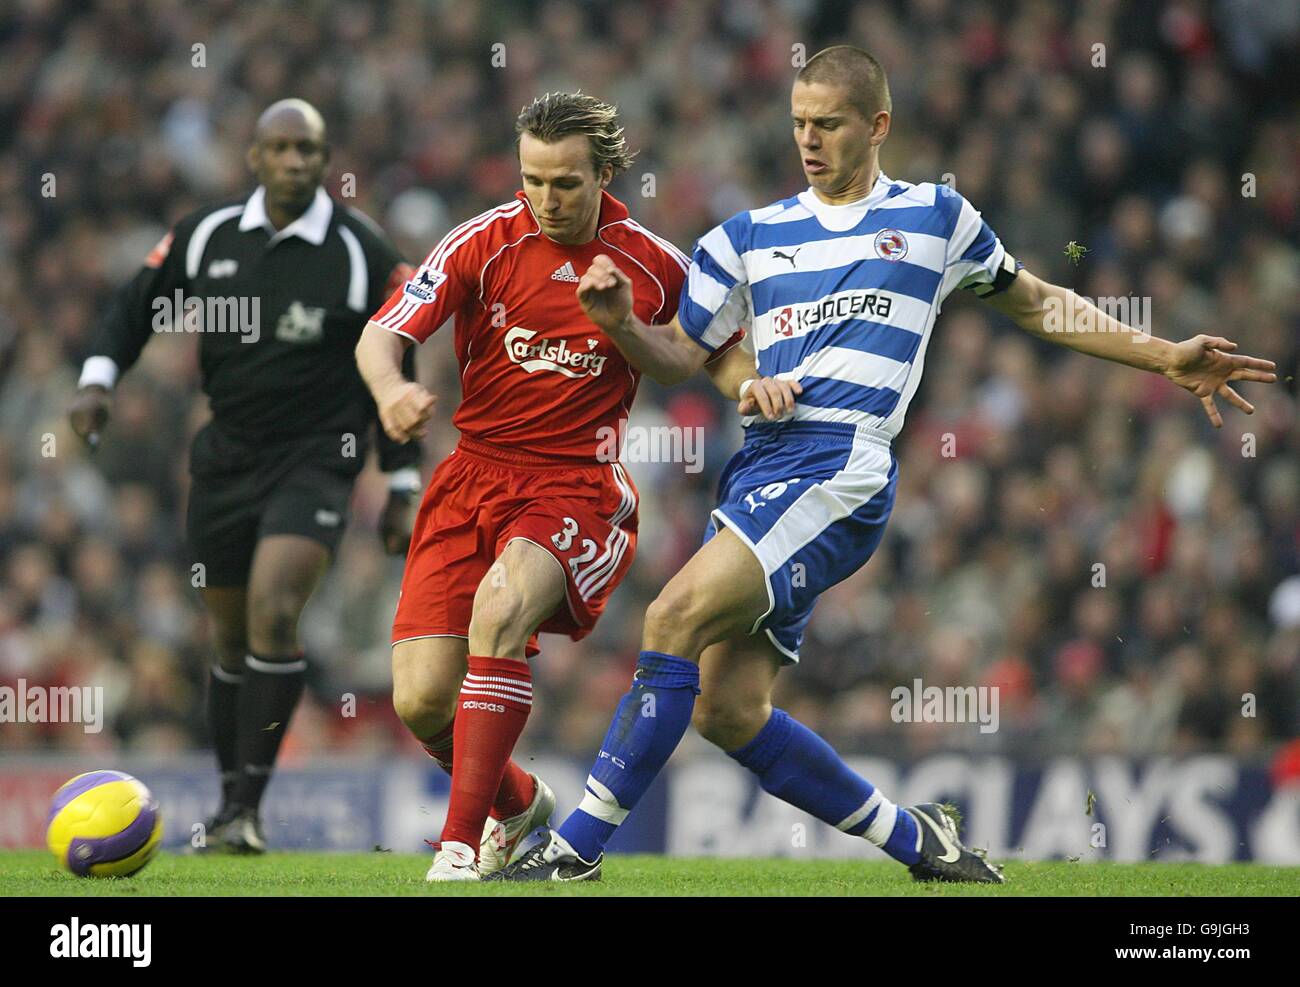 Soccer - FA Barclays Premiership - Liverpool v Reading - Anfield. Reading's Brynjar Gunnarsson is fouled by Liverpool's Boudewijn Zenden as they battle for the ball Stock Photo